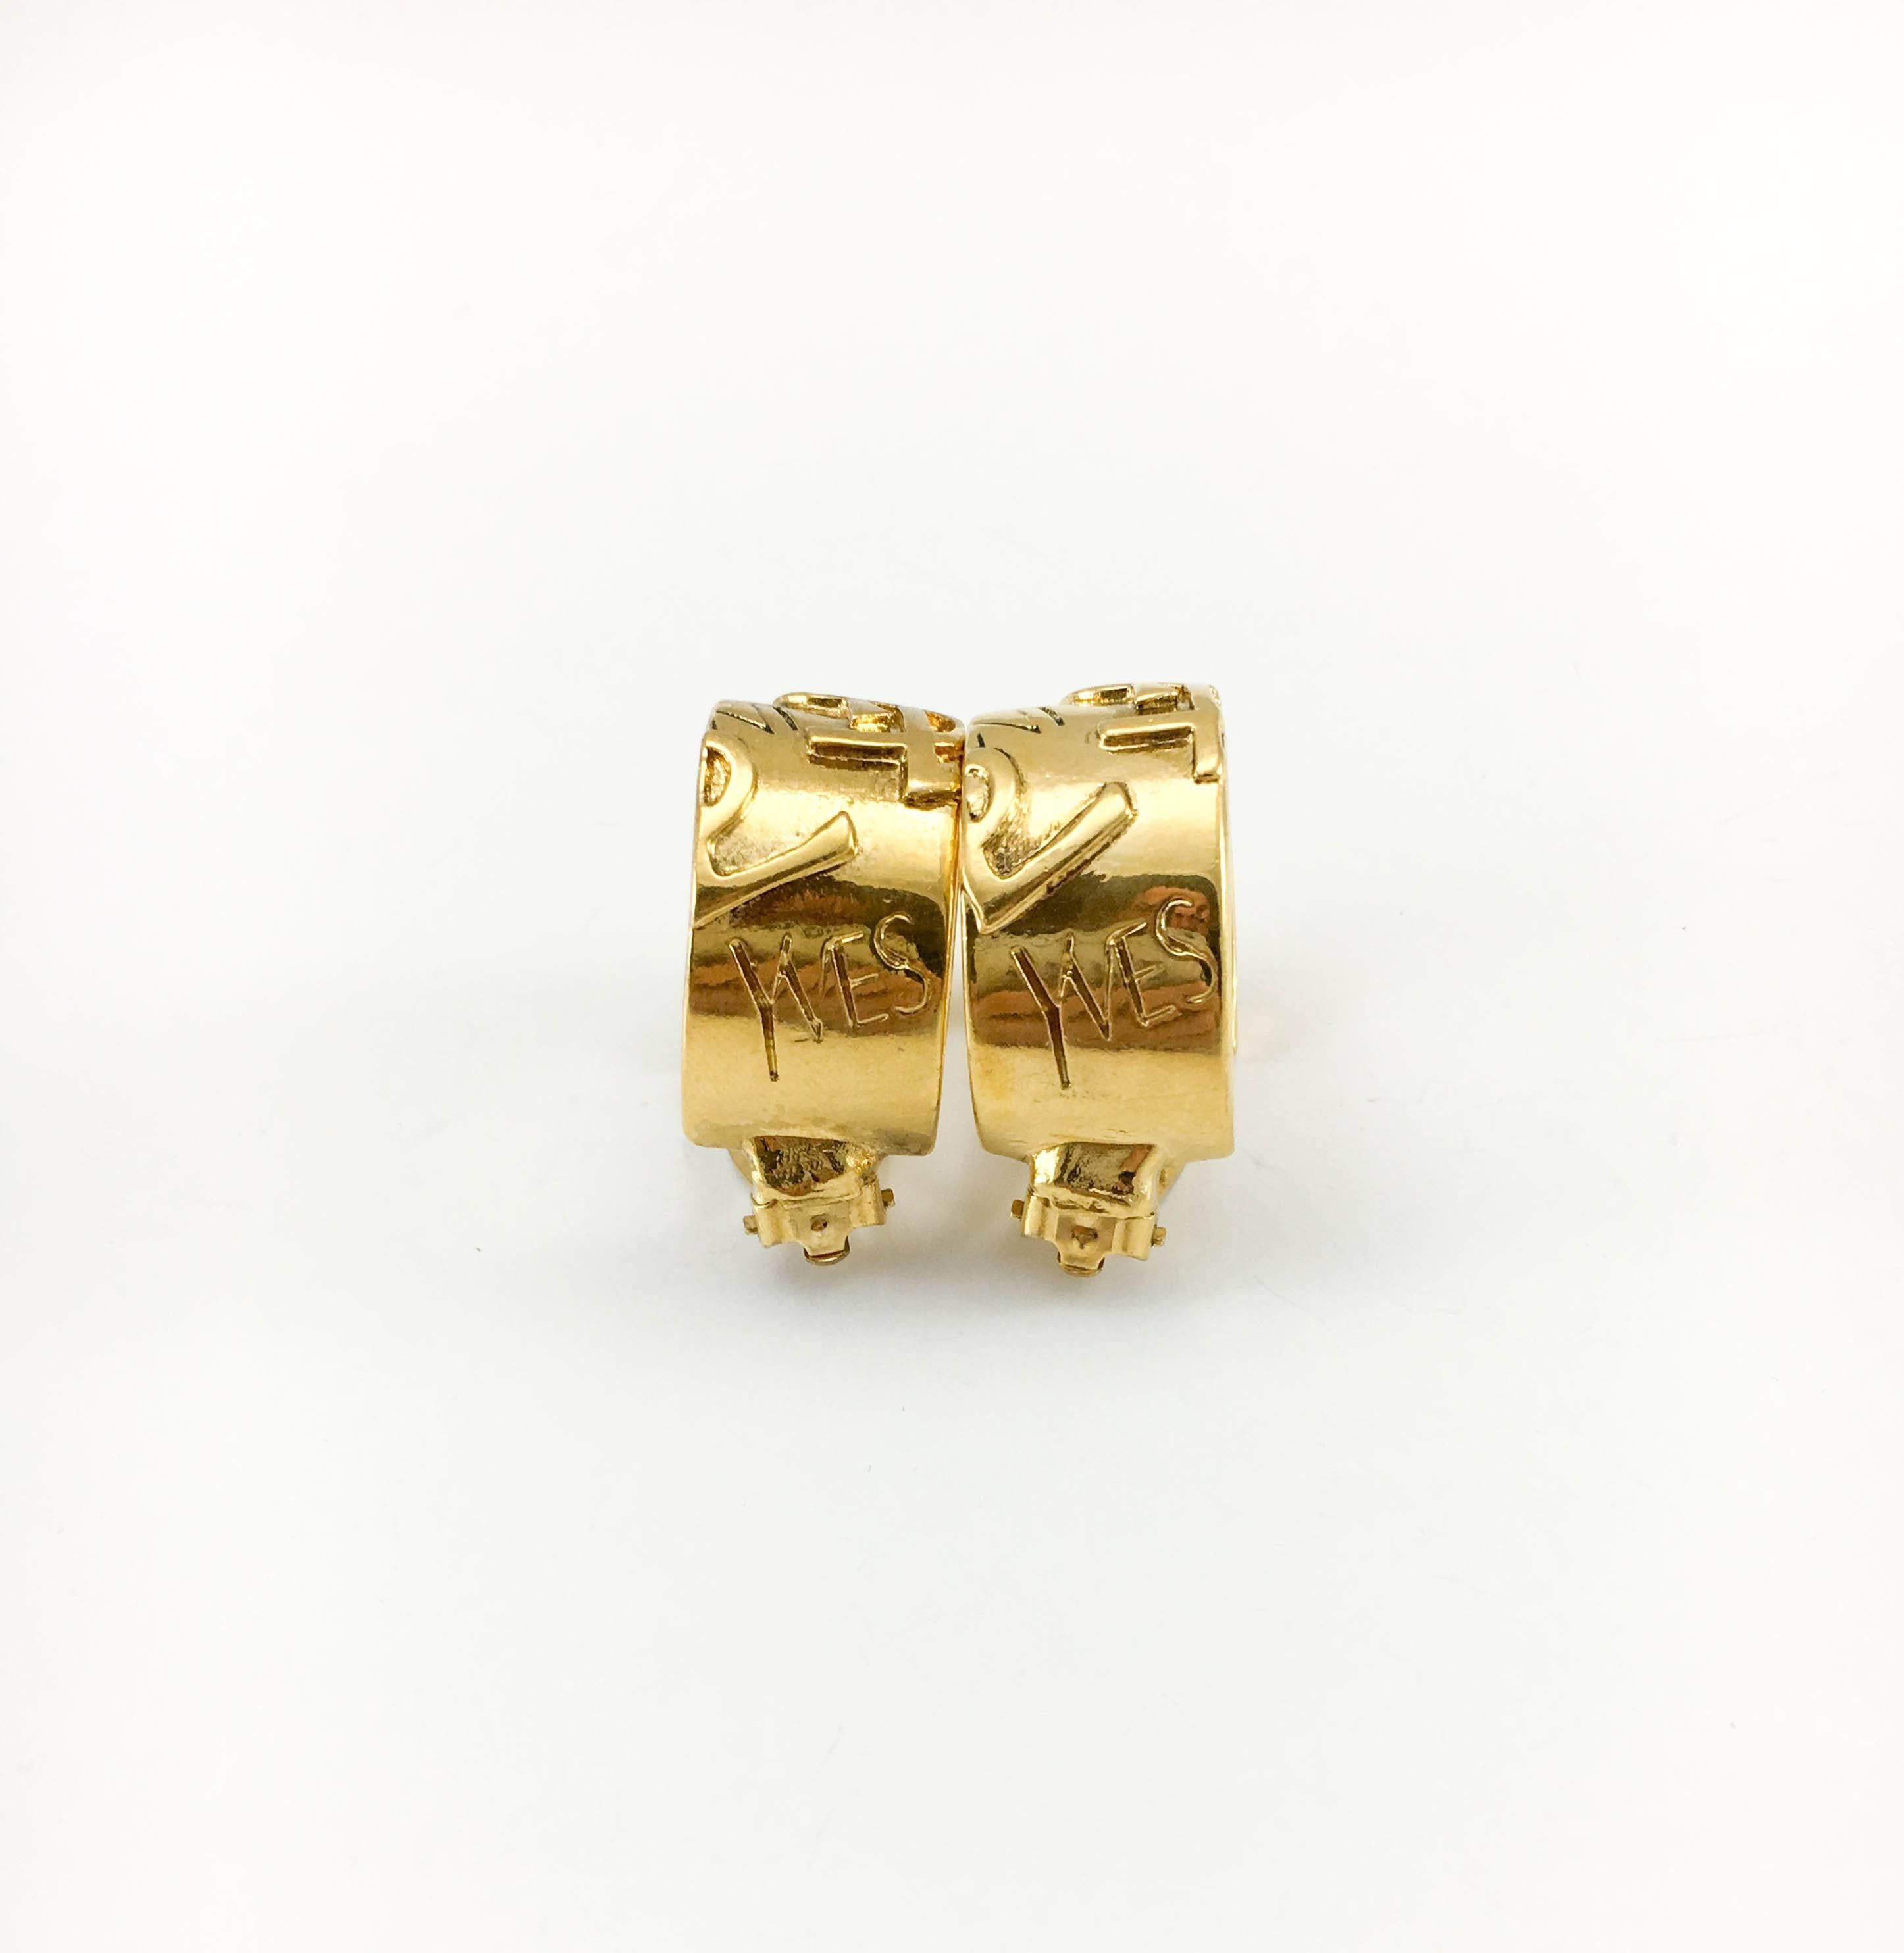 Vintage Yves Saint Laurent Gold-Plated Logo Clip-On Hoop Earrings. These stylish earrings by Yves Saint Laurent date back from the 1980’s. Made in gold-plated metal, these wide hoops feature the iconic YSL logo and the word ‘Yves’. YSL signed on the